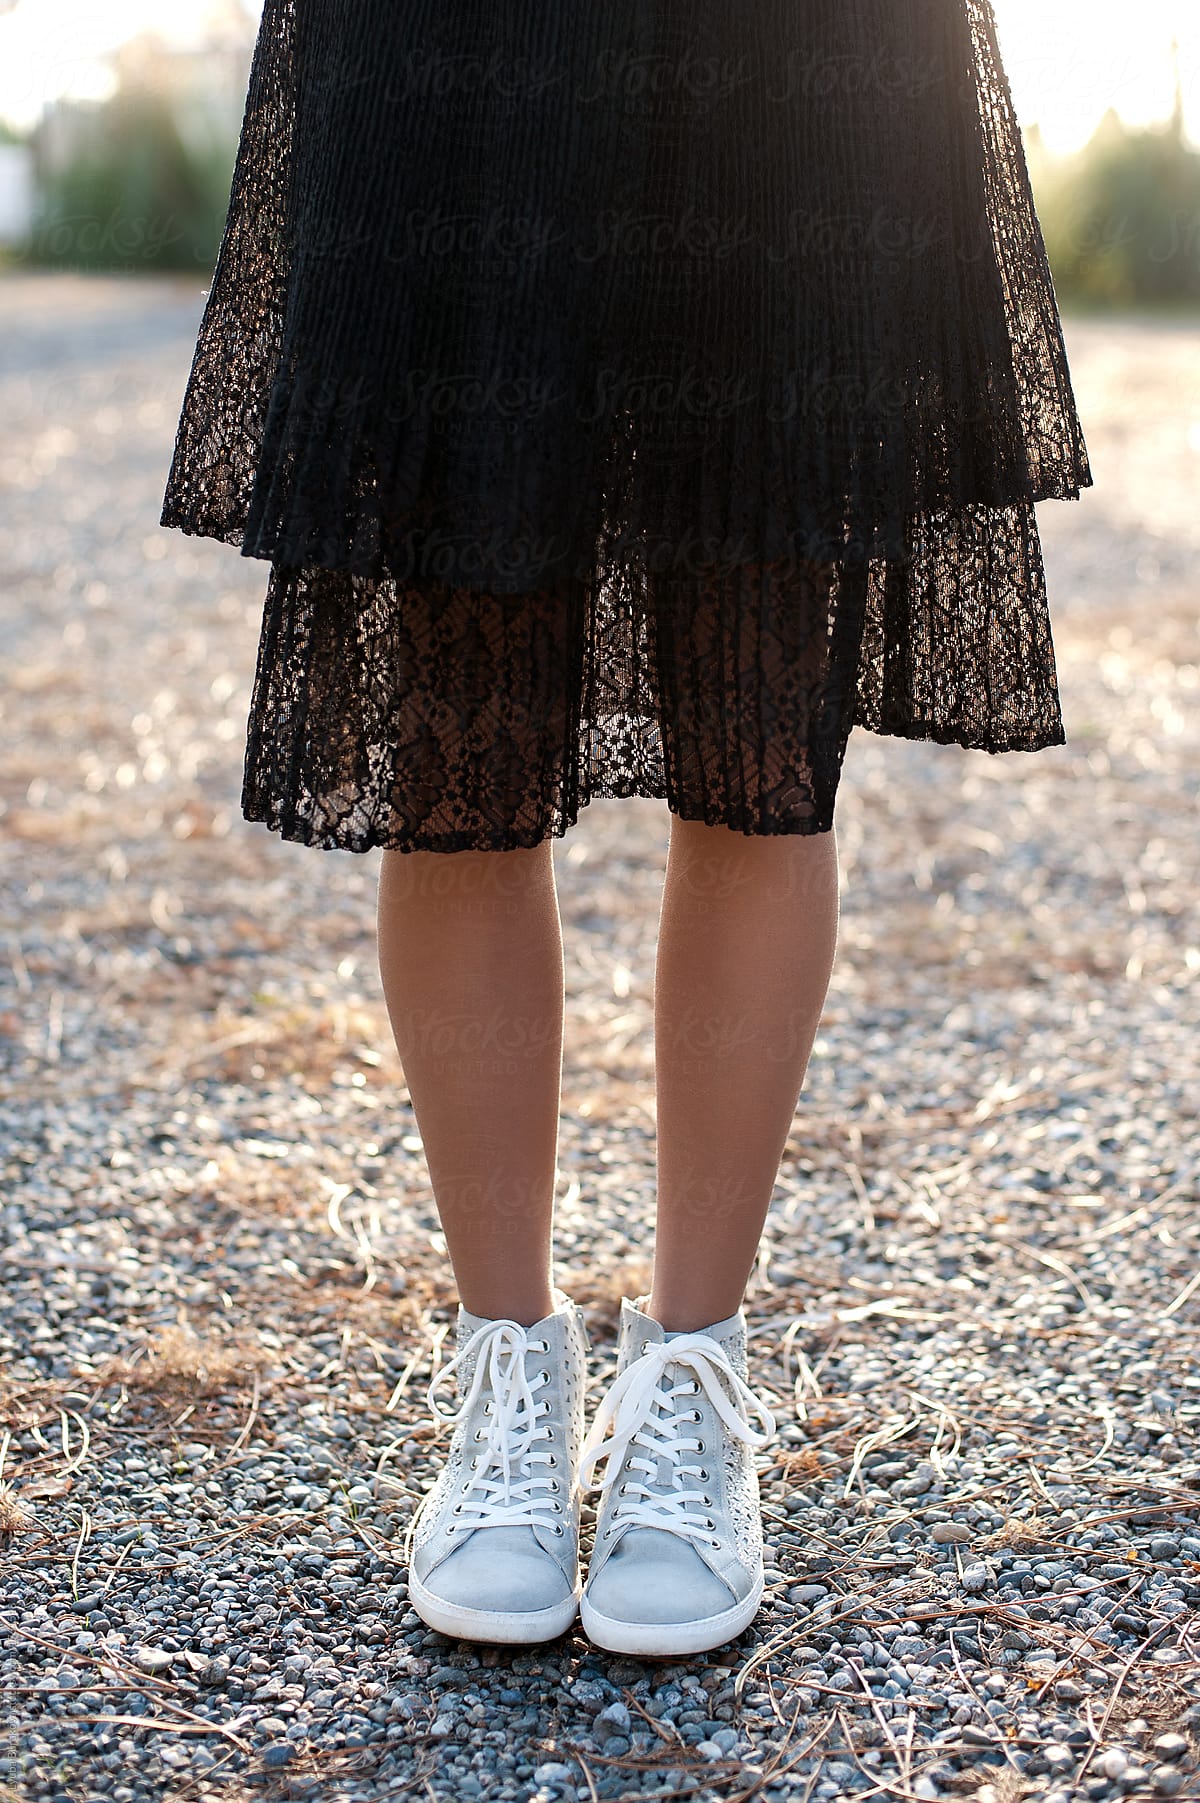 Lace skirt and sneakers